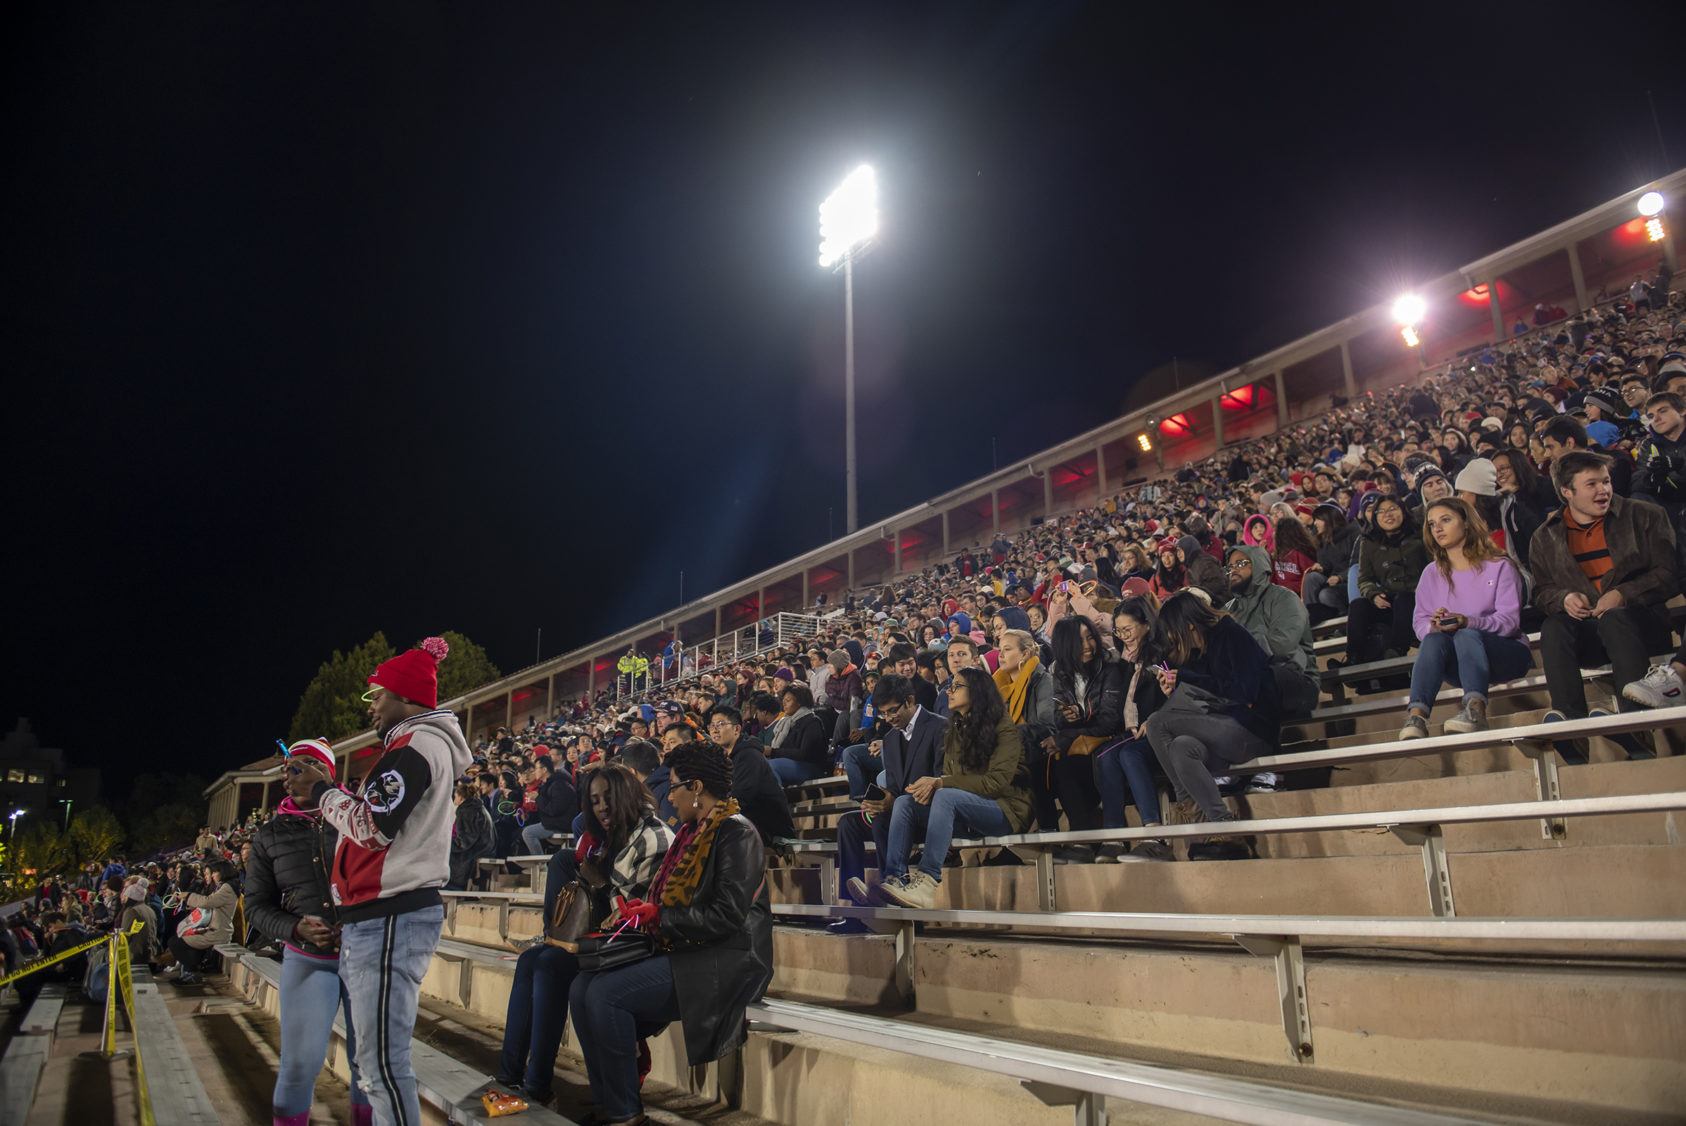 The Schoellkopf Field stands, full of spectators at night.